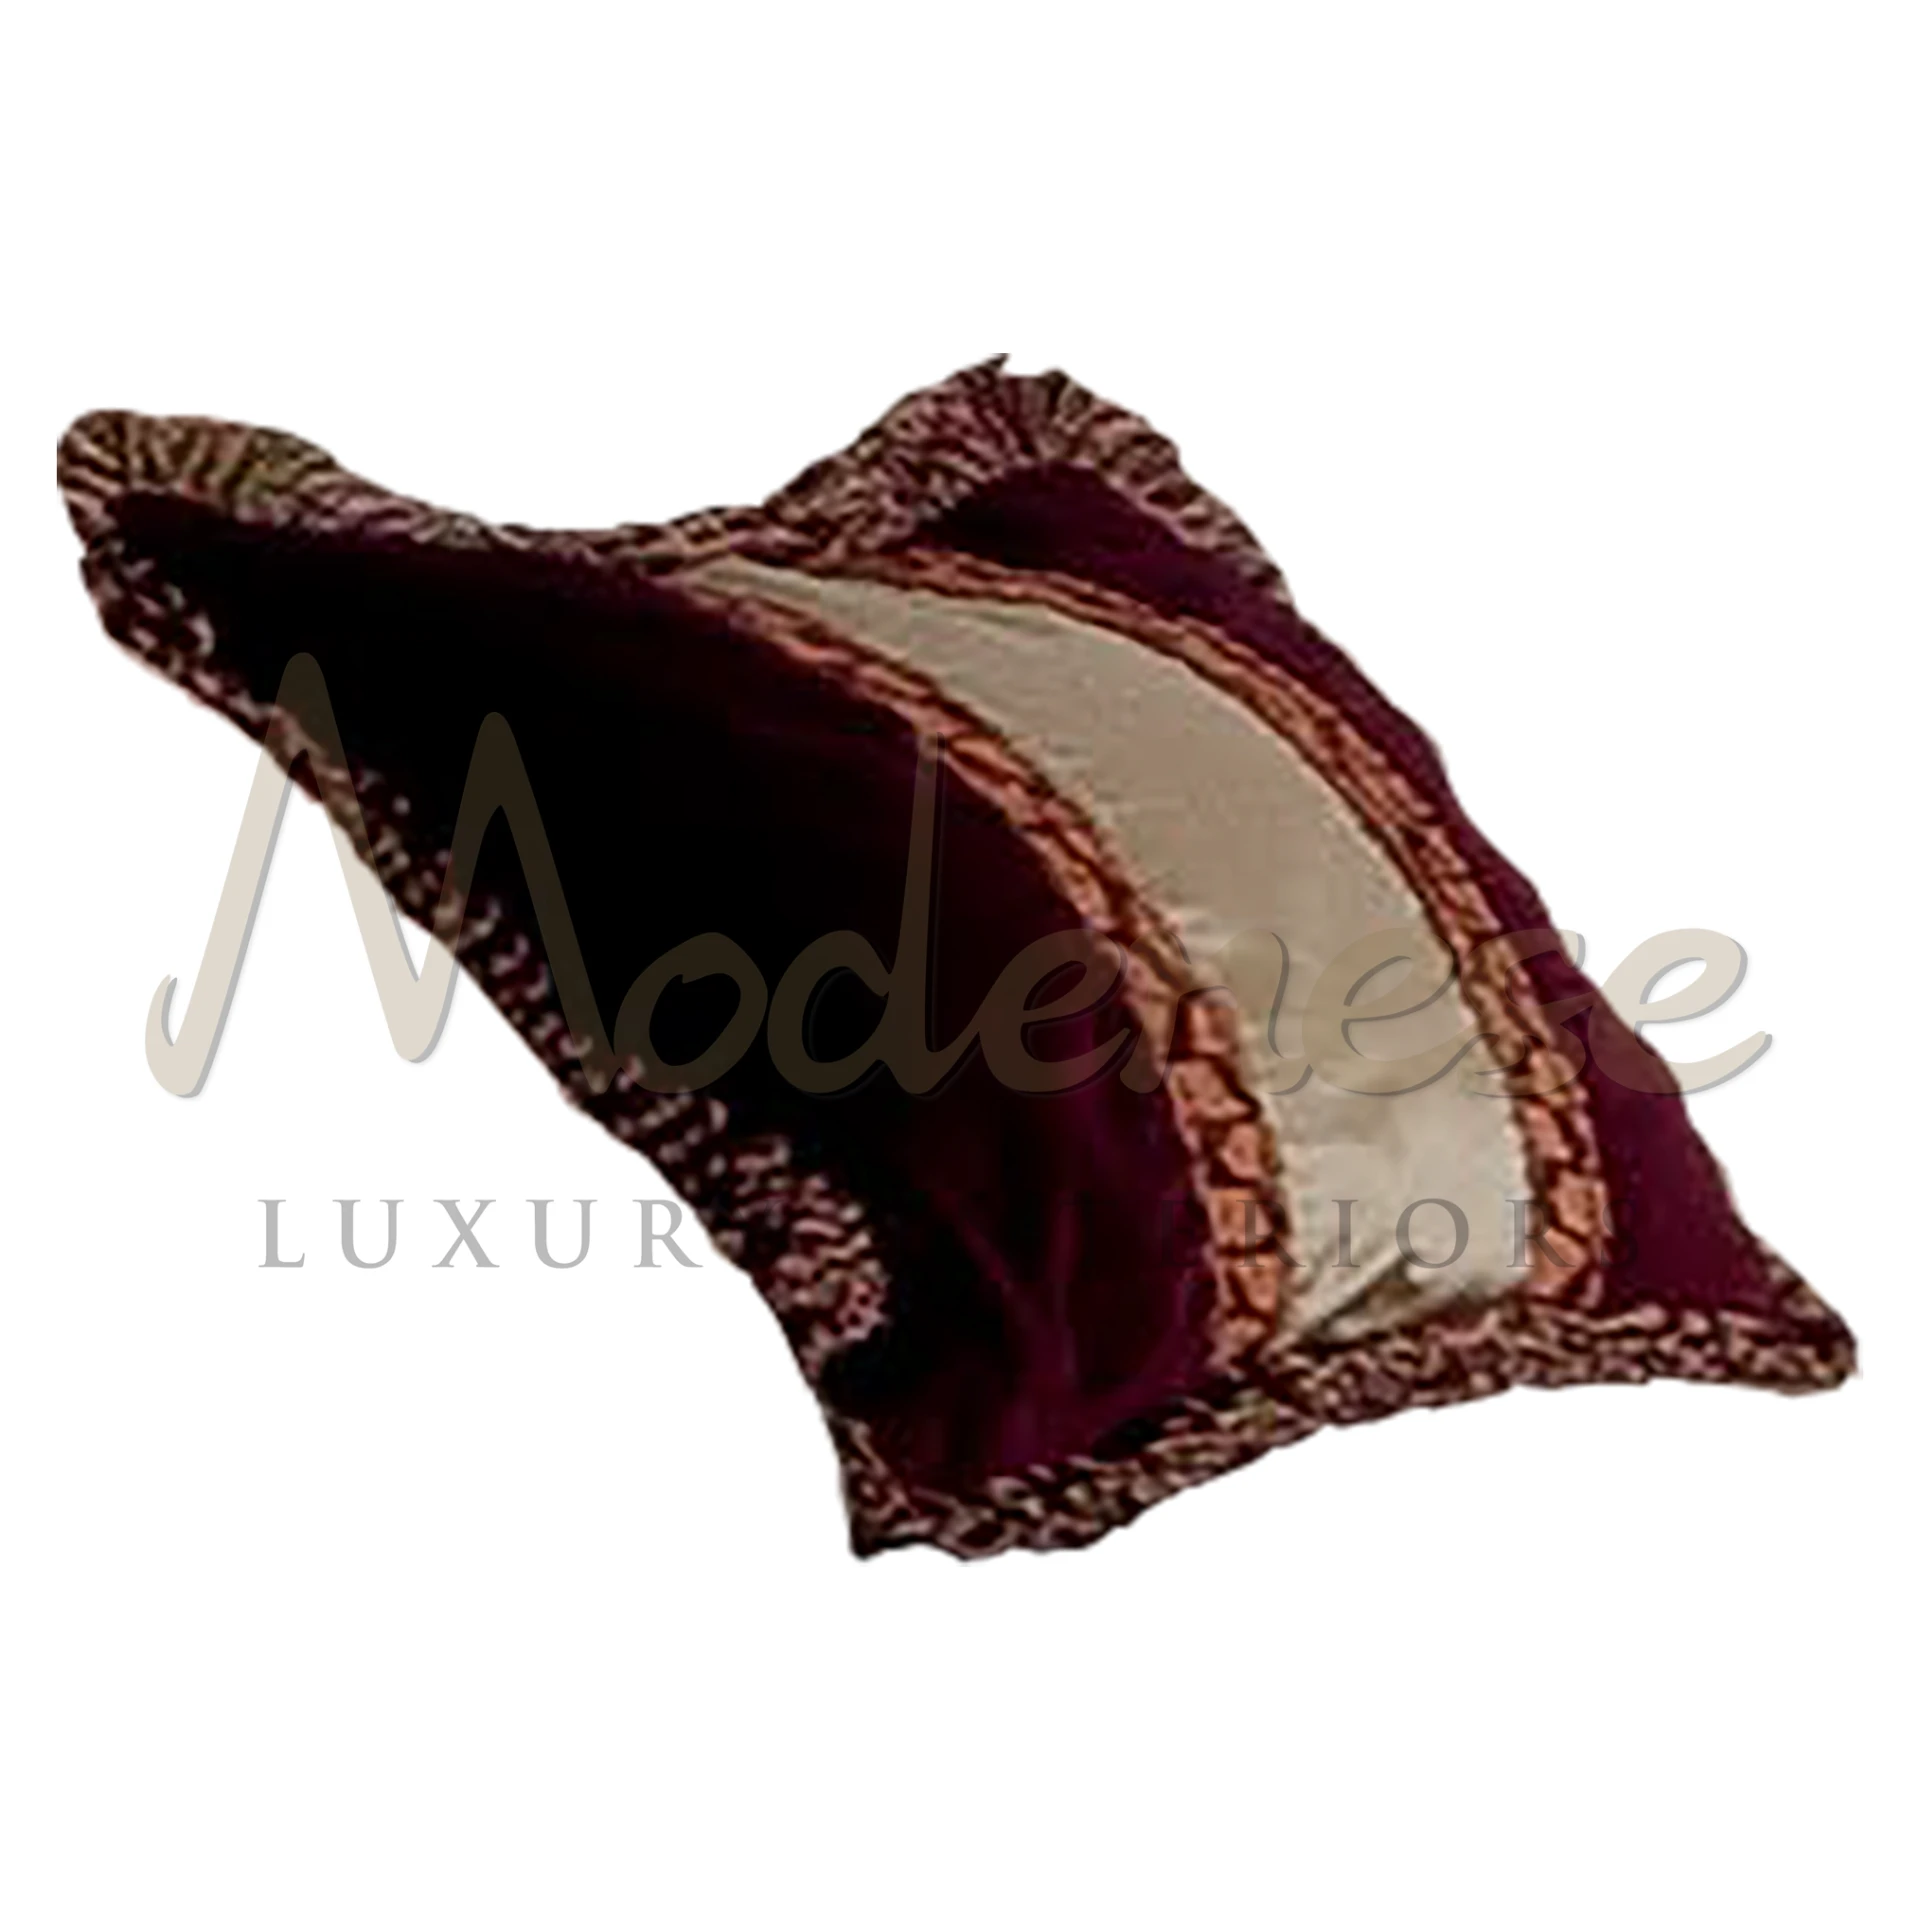 Traditional Royal Pillow: A luxurious blend of classical design and high-quality Italian textiles for supreme comfort.